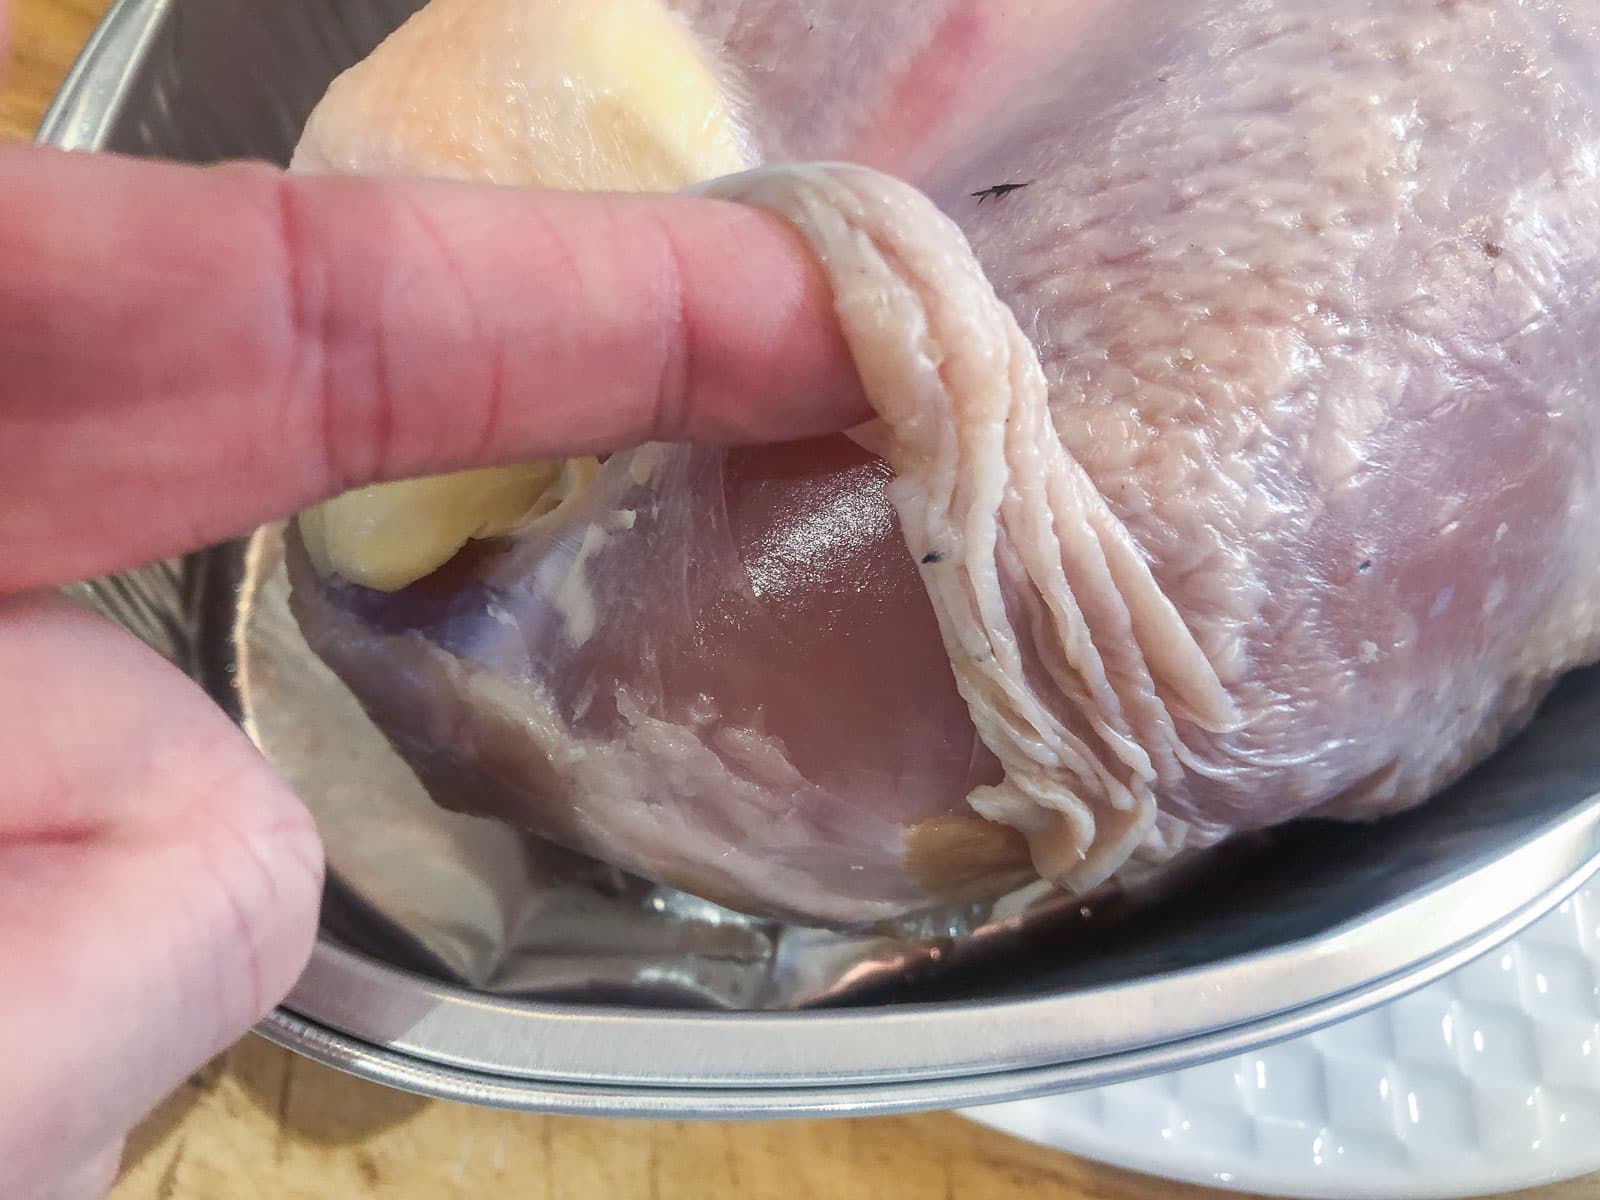 an image showing how to lift the skin of a turkey breast to allow space to stuff butter or herbs under it.